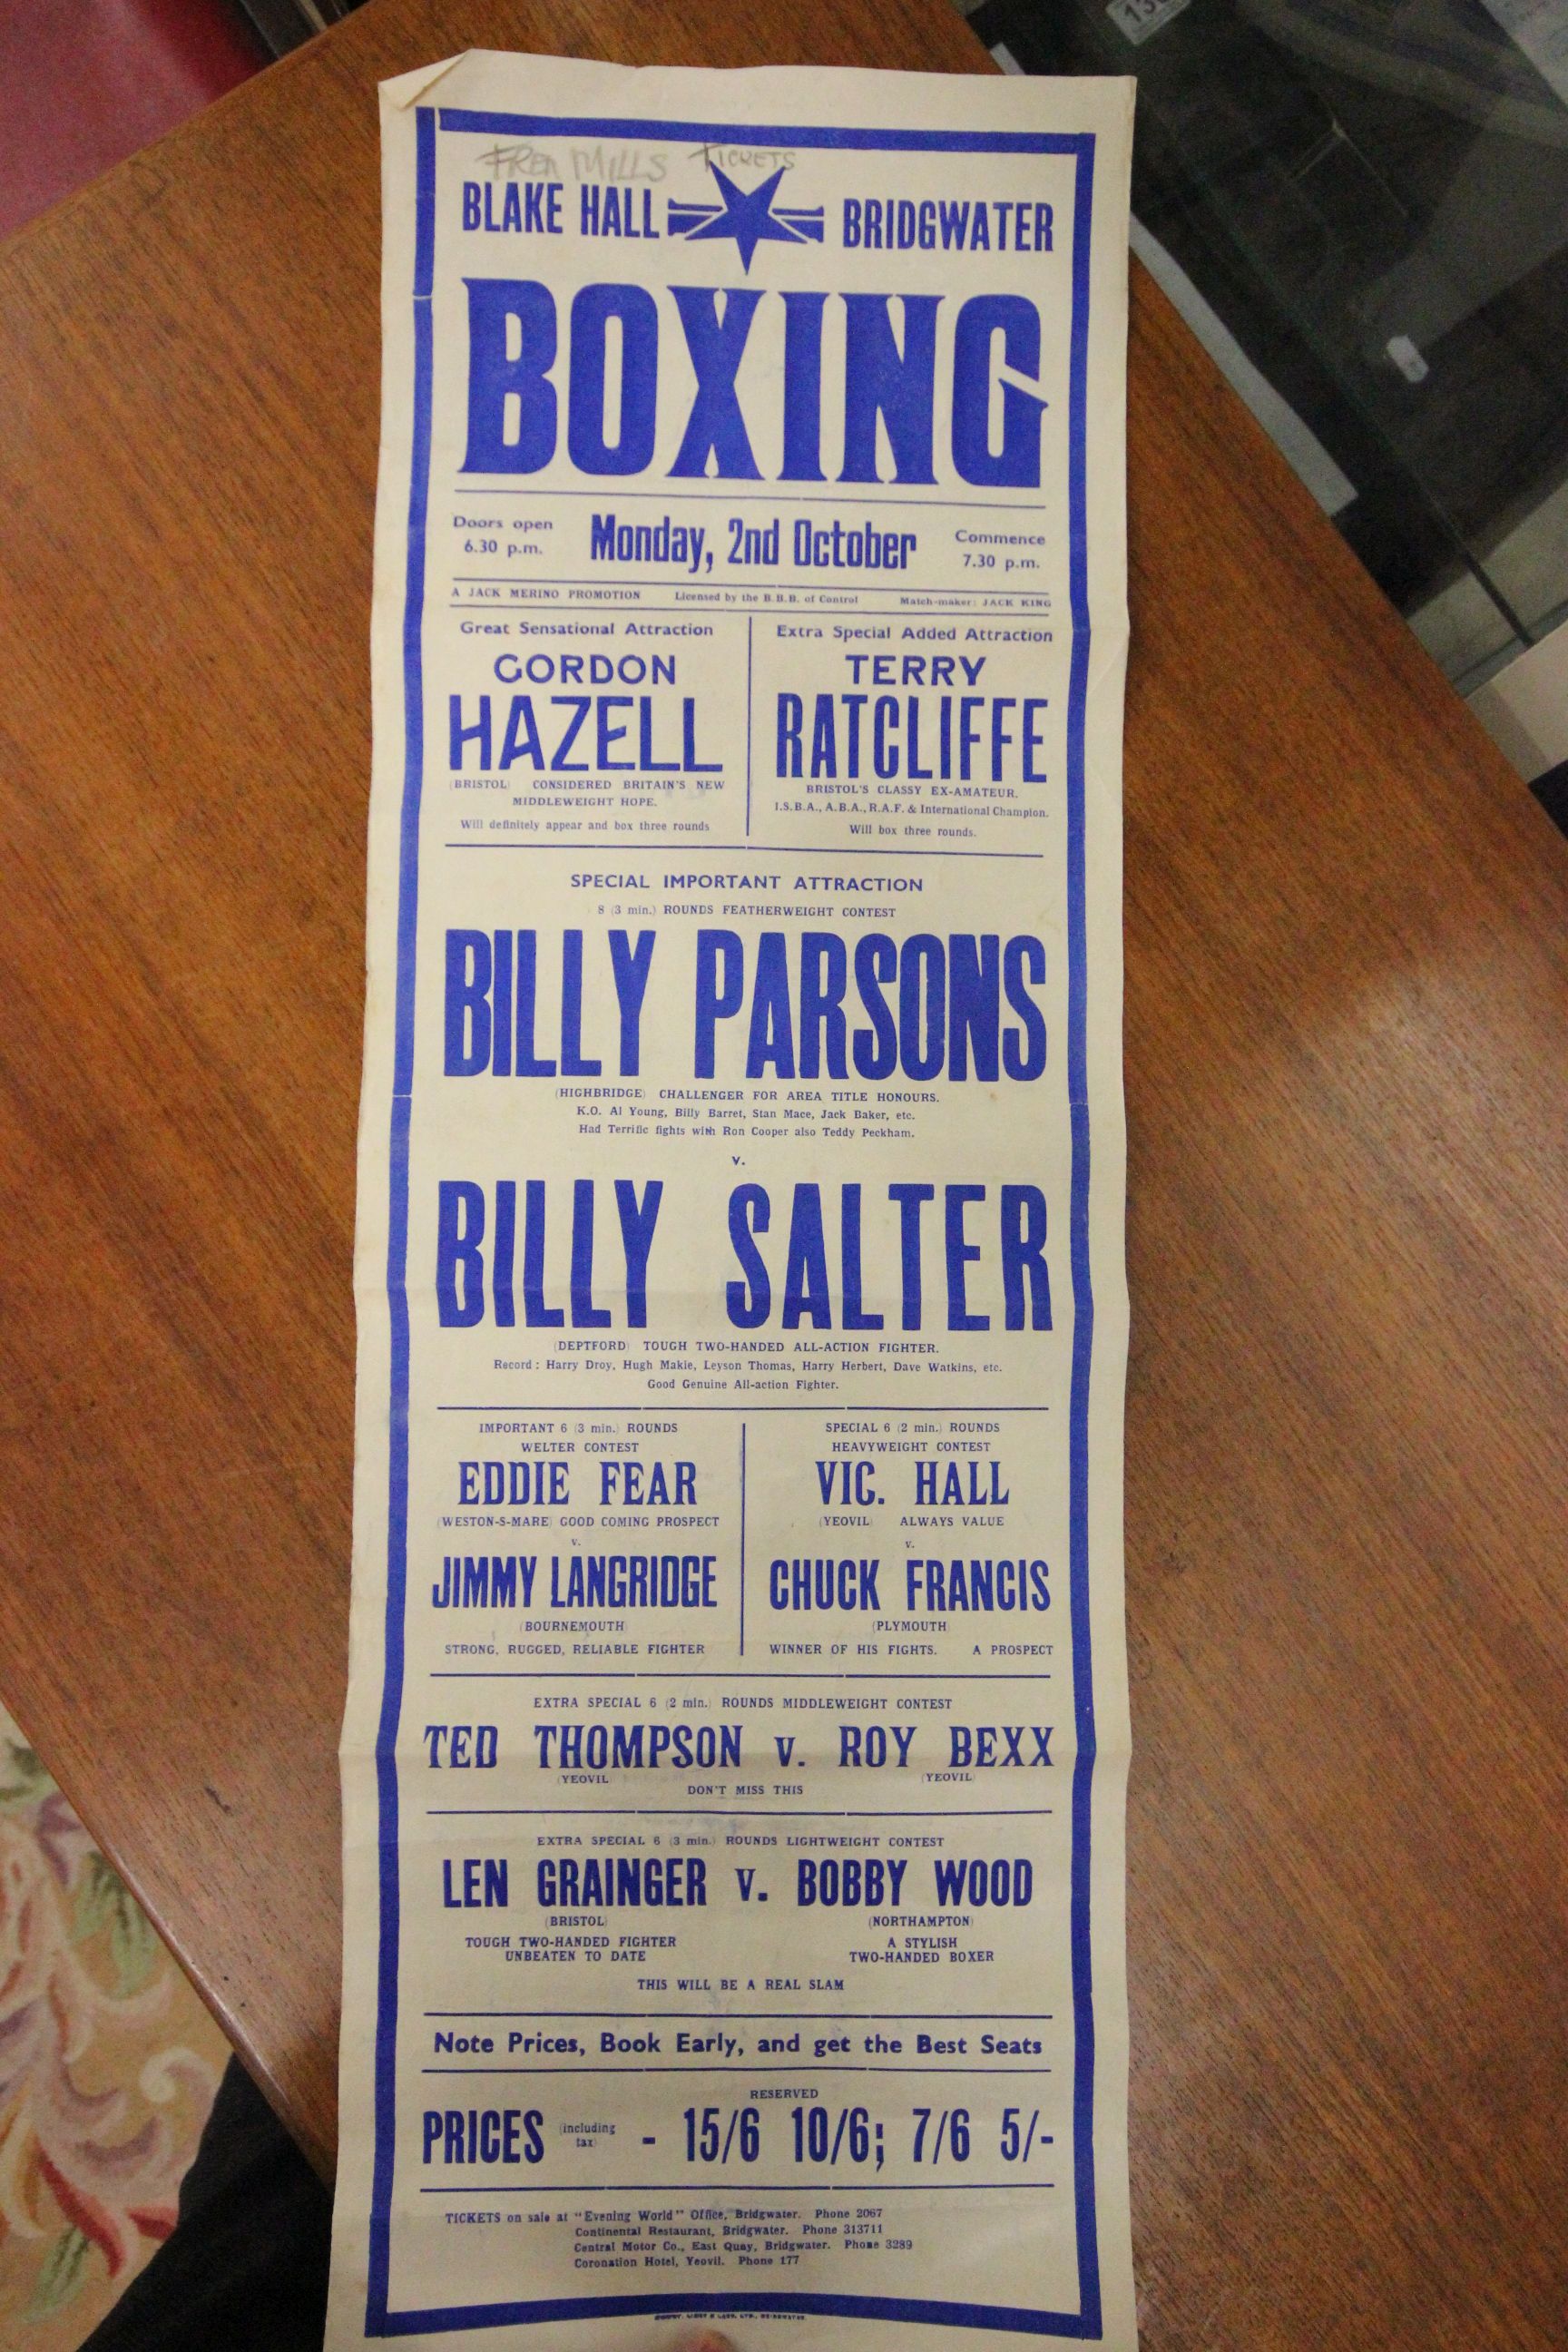 Boxing - Promotional poster, Blake Hall Bridgwater Monday 2 Oct probably 1950s, including Billy